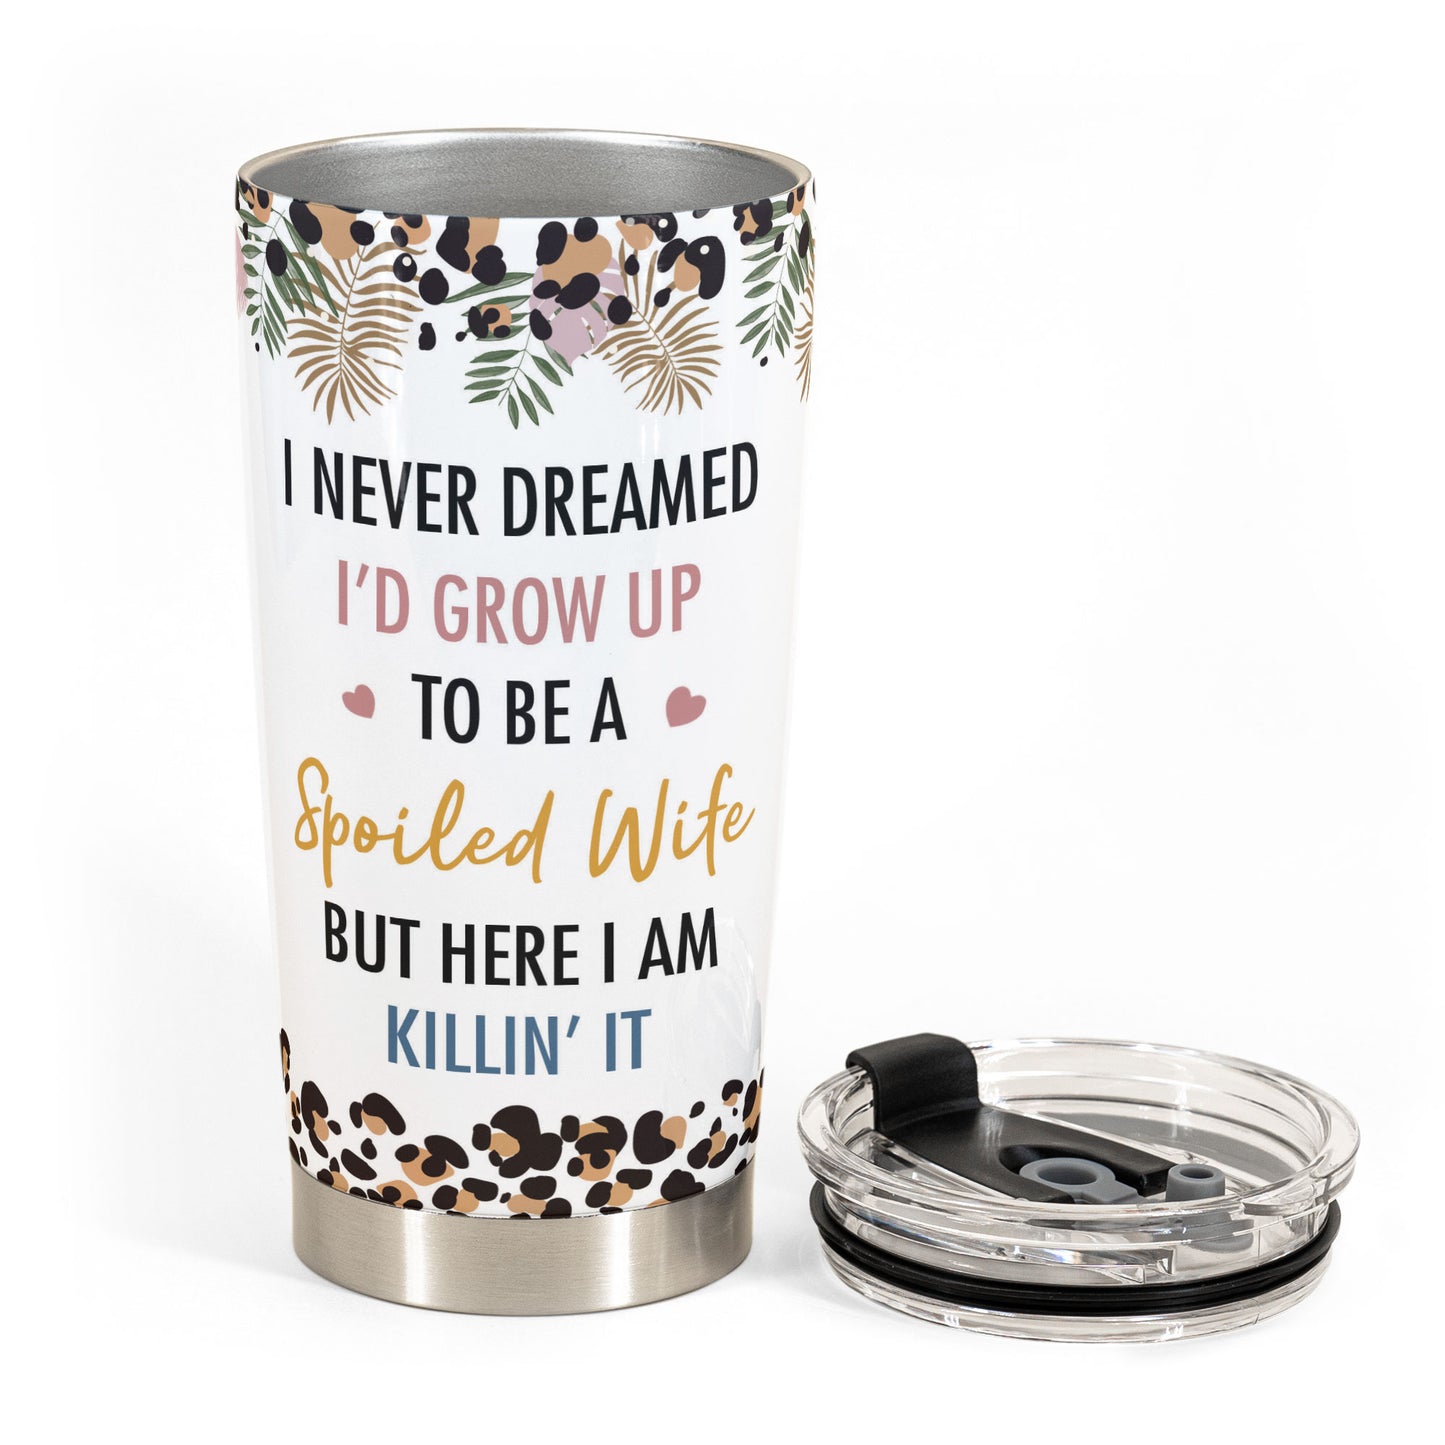 Dreamed To Be A Spoiled Wife - Personalized Tumbler Cup - Anniversary, Wedding Gift For Wife, Lover, Spouse